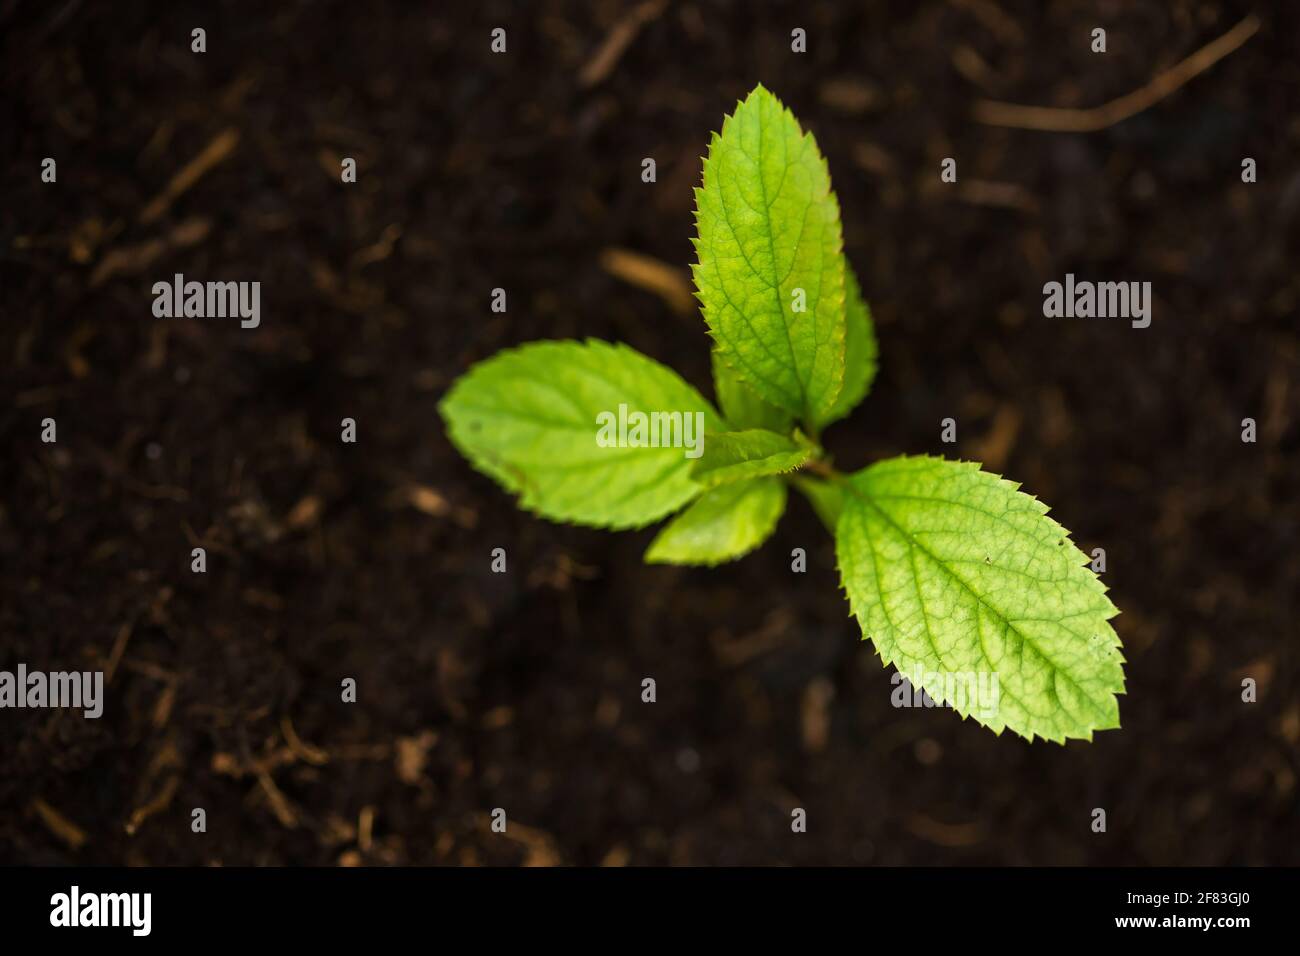 Small apple tree growing view from above Stock Photo